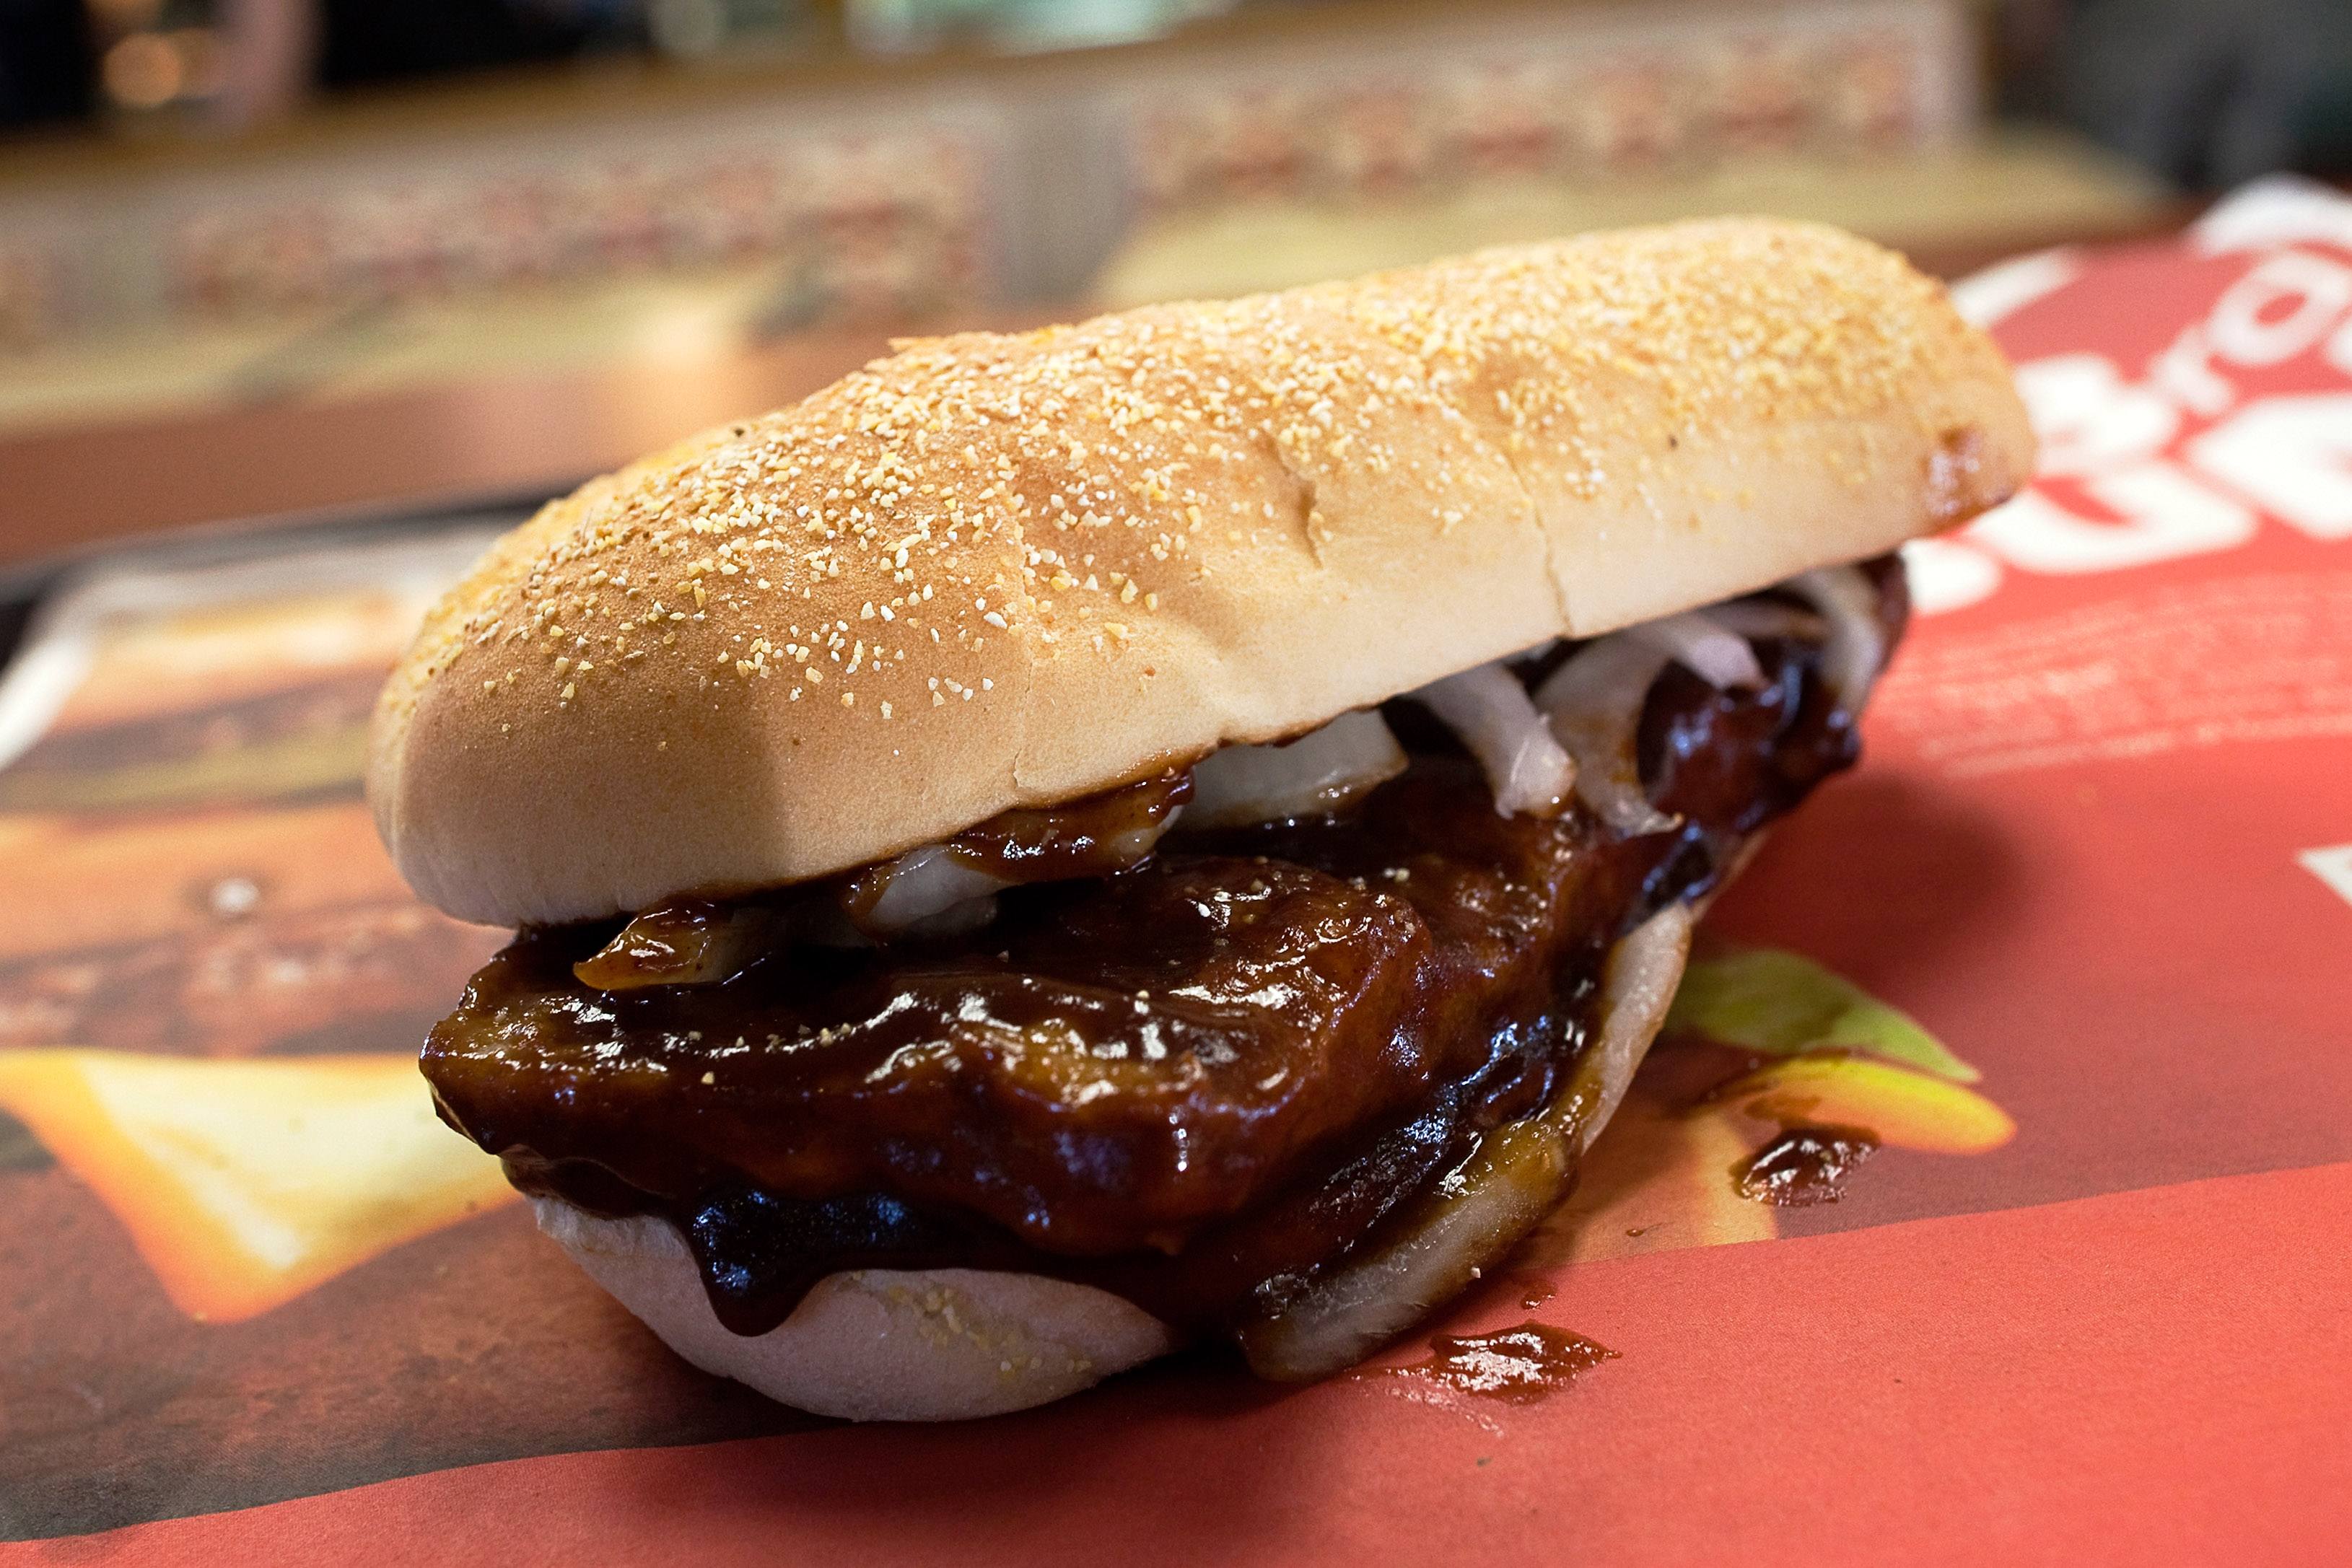 The McDonald’s McRib is Back for 2018 and Fans Are Losing Their Minds